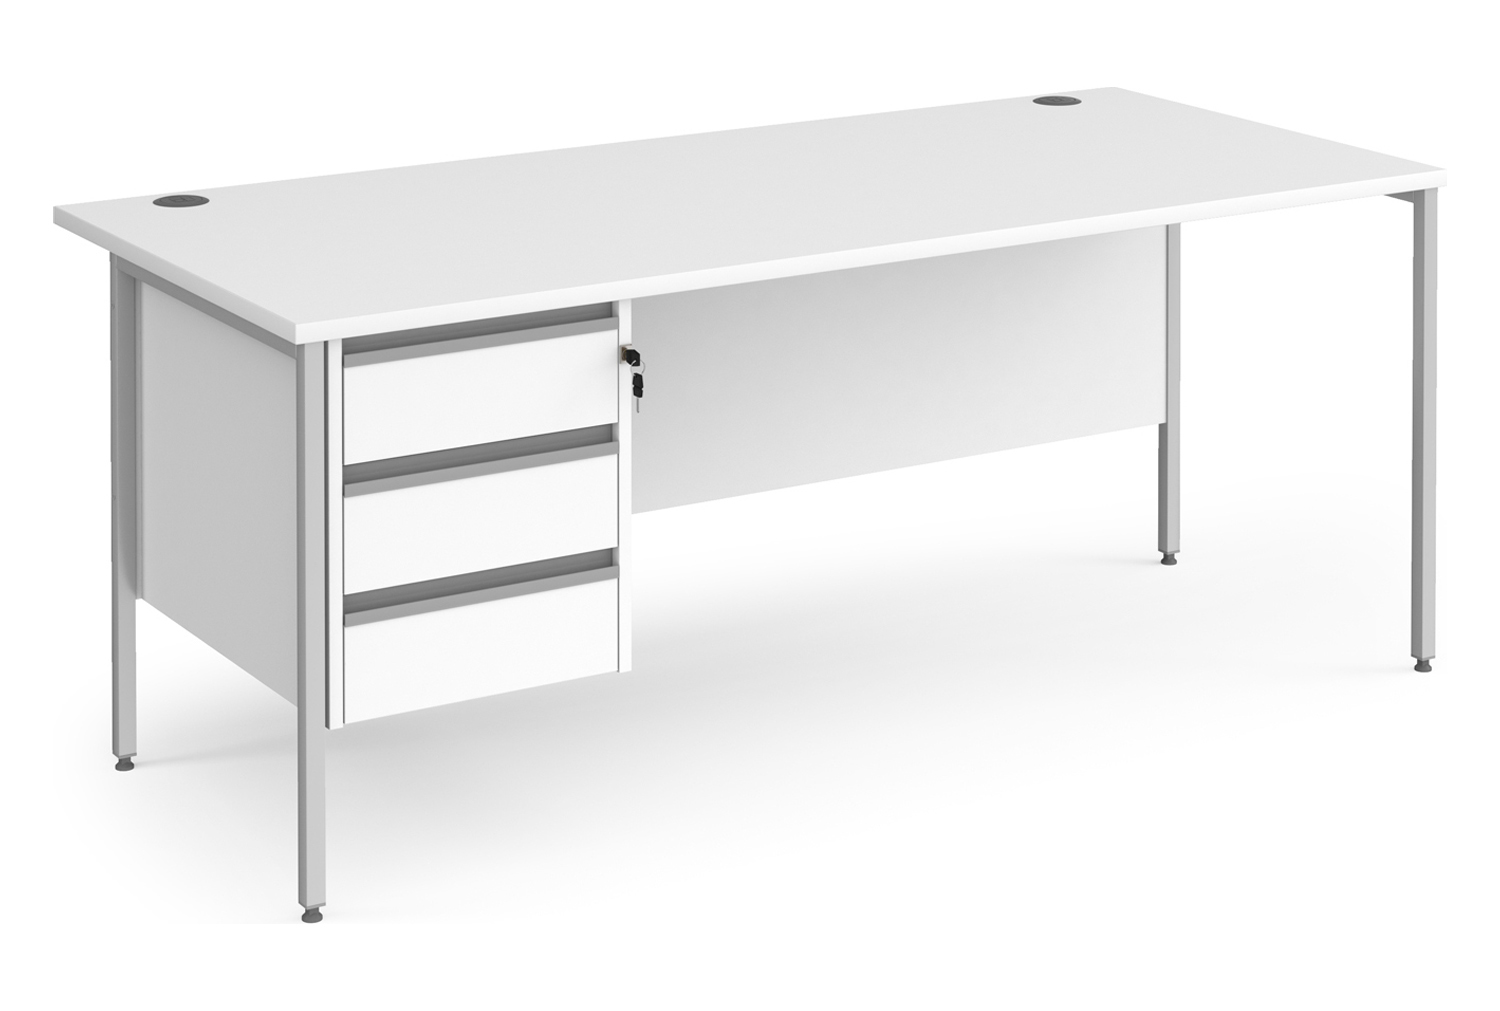 Value Line Classic+ Rectangular H-Leg Office Desk 3 Drawers (Silver Leg), 180wx80dx73h (cm), White, Express Delivery